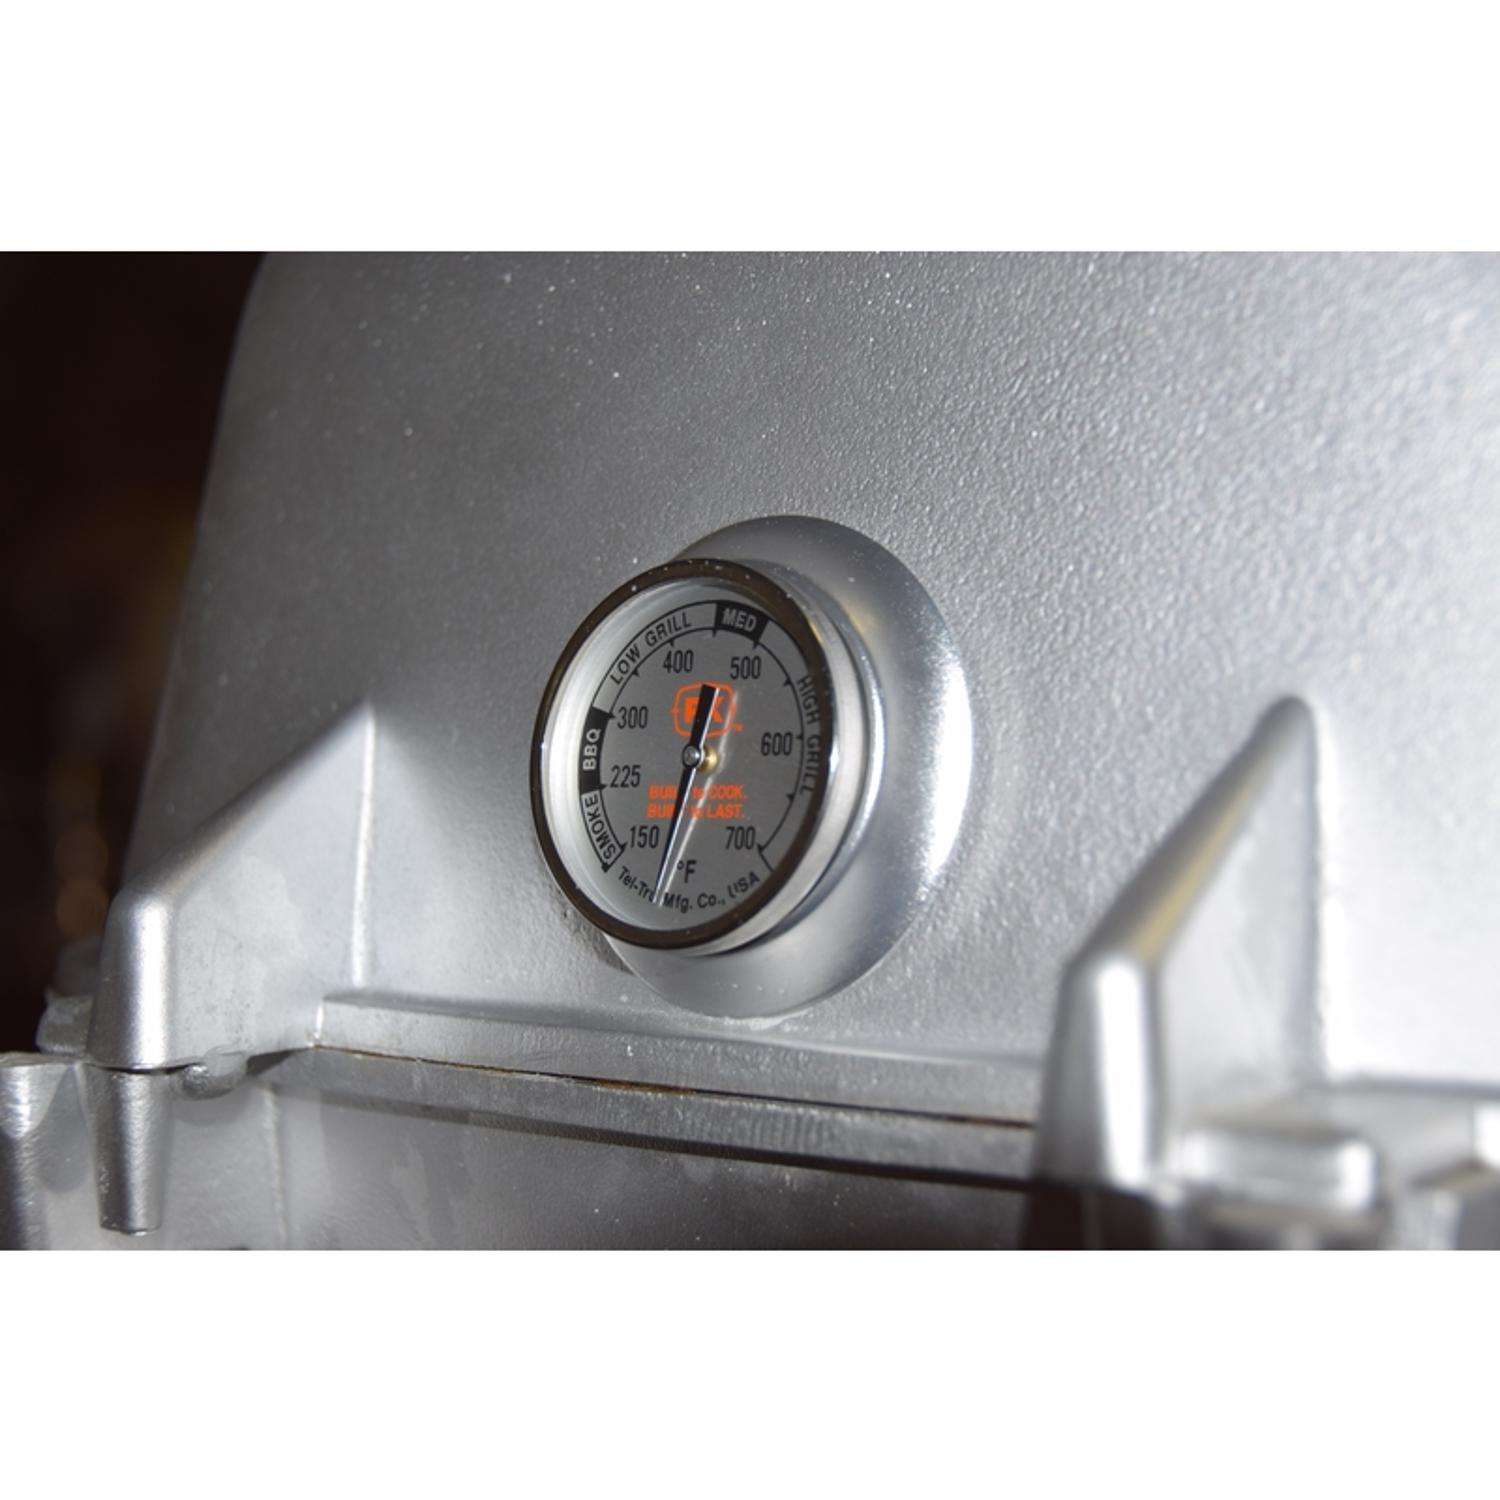 Replacement Thermometer for Tailgater Grill